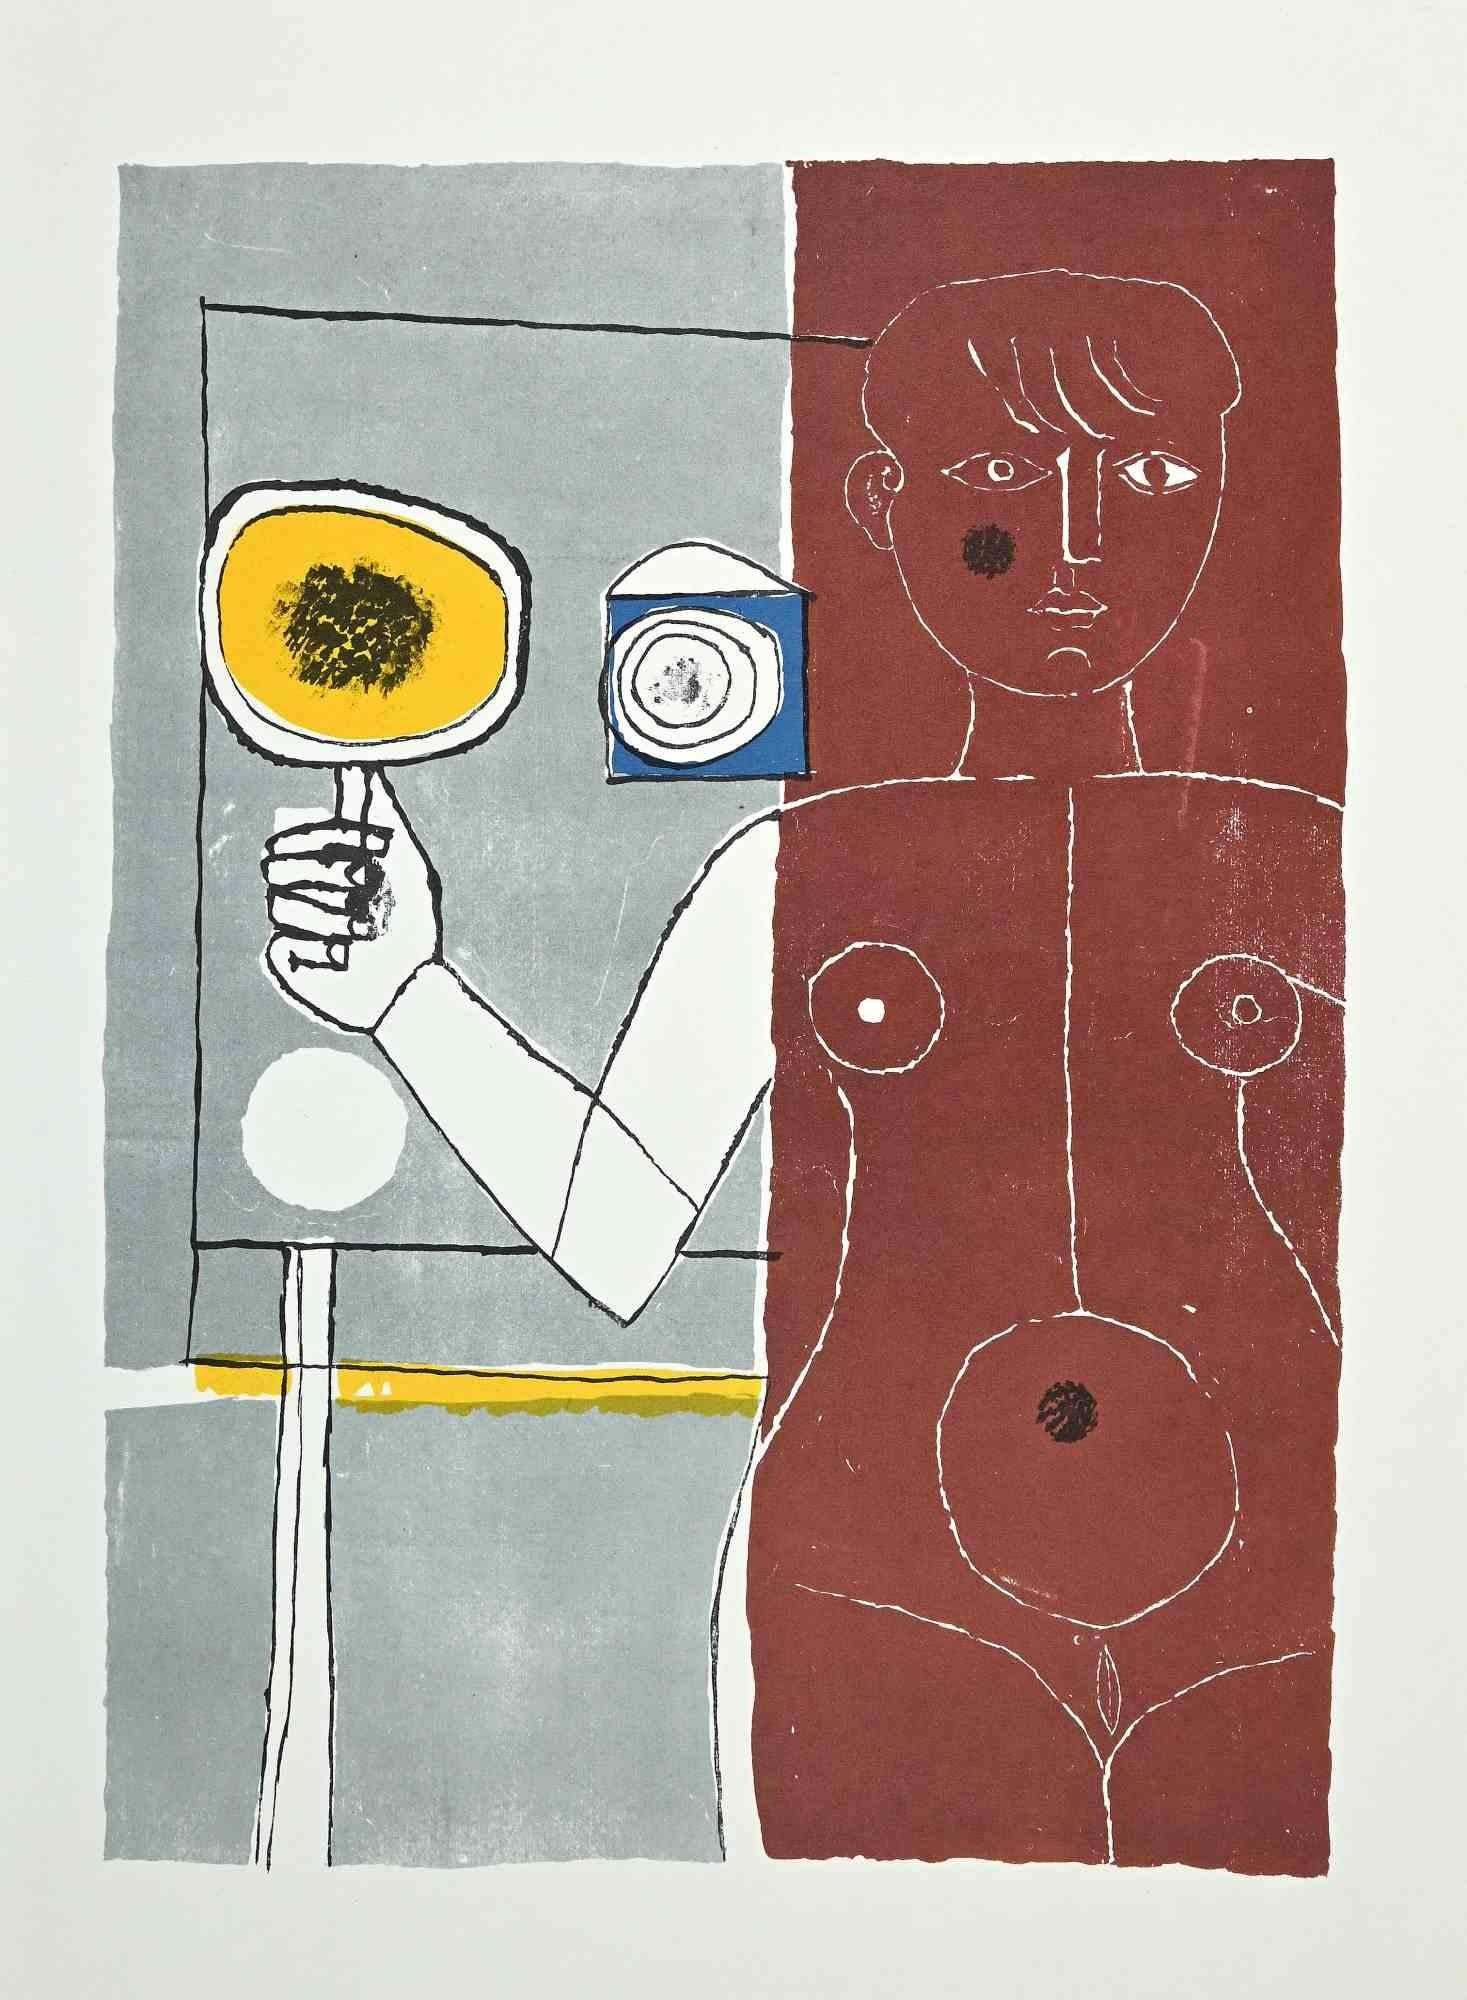 Figure is a Vintage Offset Print on ivory-colored paper, realized by  Franco Gentilini ( Italian Painter, 1909-1981), in the 1970s.

The state of preservation of the artwork is excellent.

Franco Gentilini ( Italian Painter, 1909-1981): Gentilini's